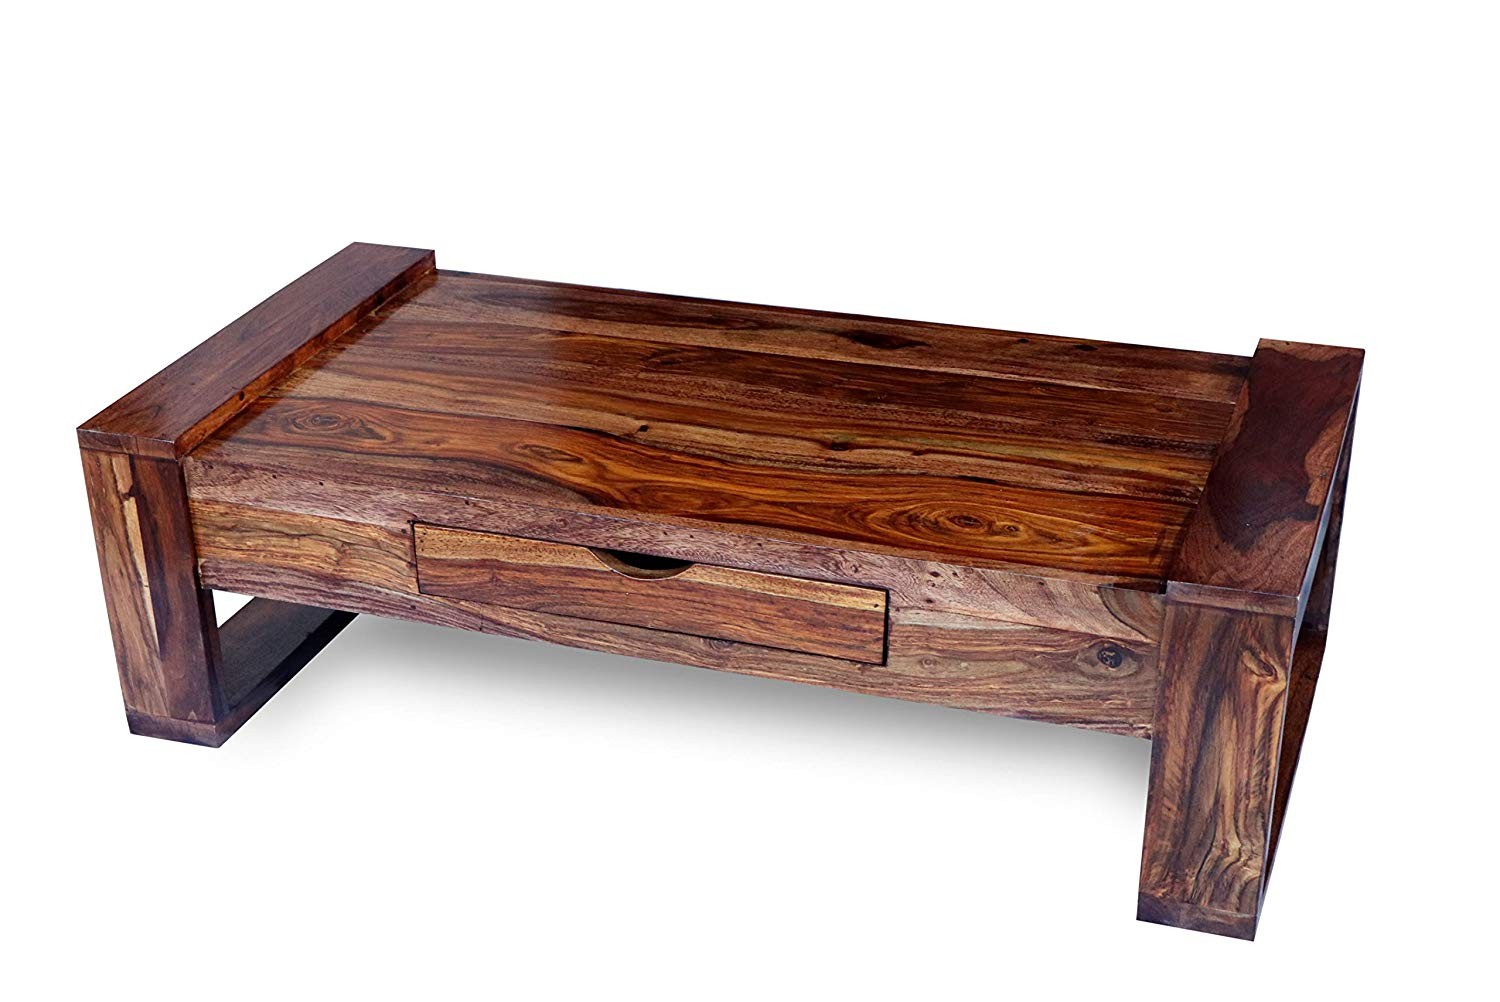 Quartz Wood Center Table Coffee Table With Drawer Living Room Table With Drawer Natural Teak Finish Shagun Arts